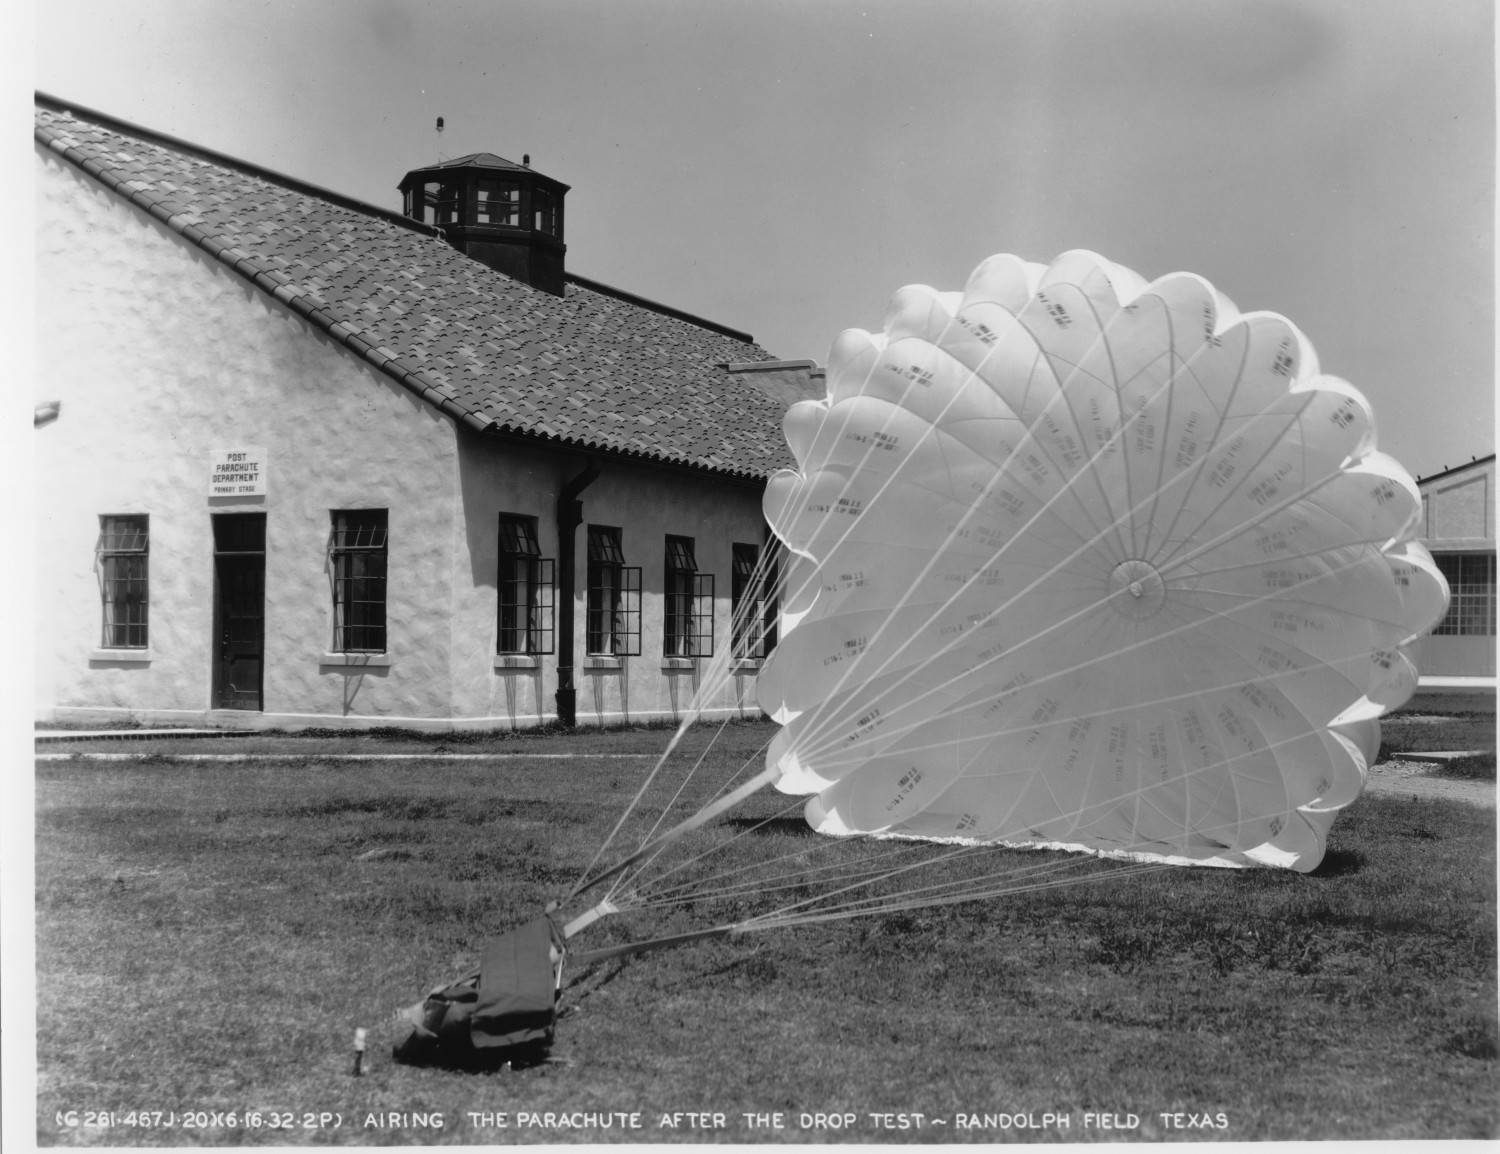 Airing the Parachute after the Drop Test
                                                
                                                    [Sequence #]: 1 of 1
                                                